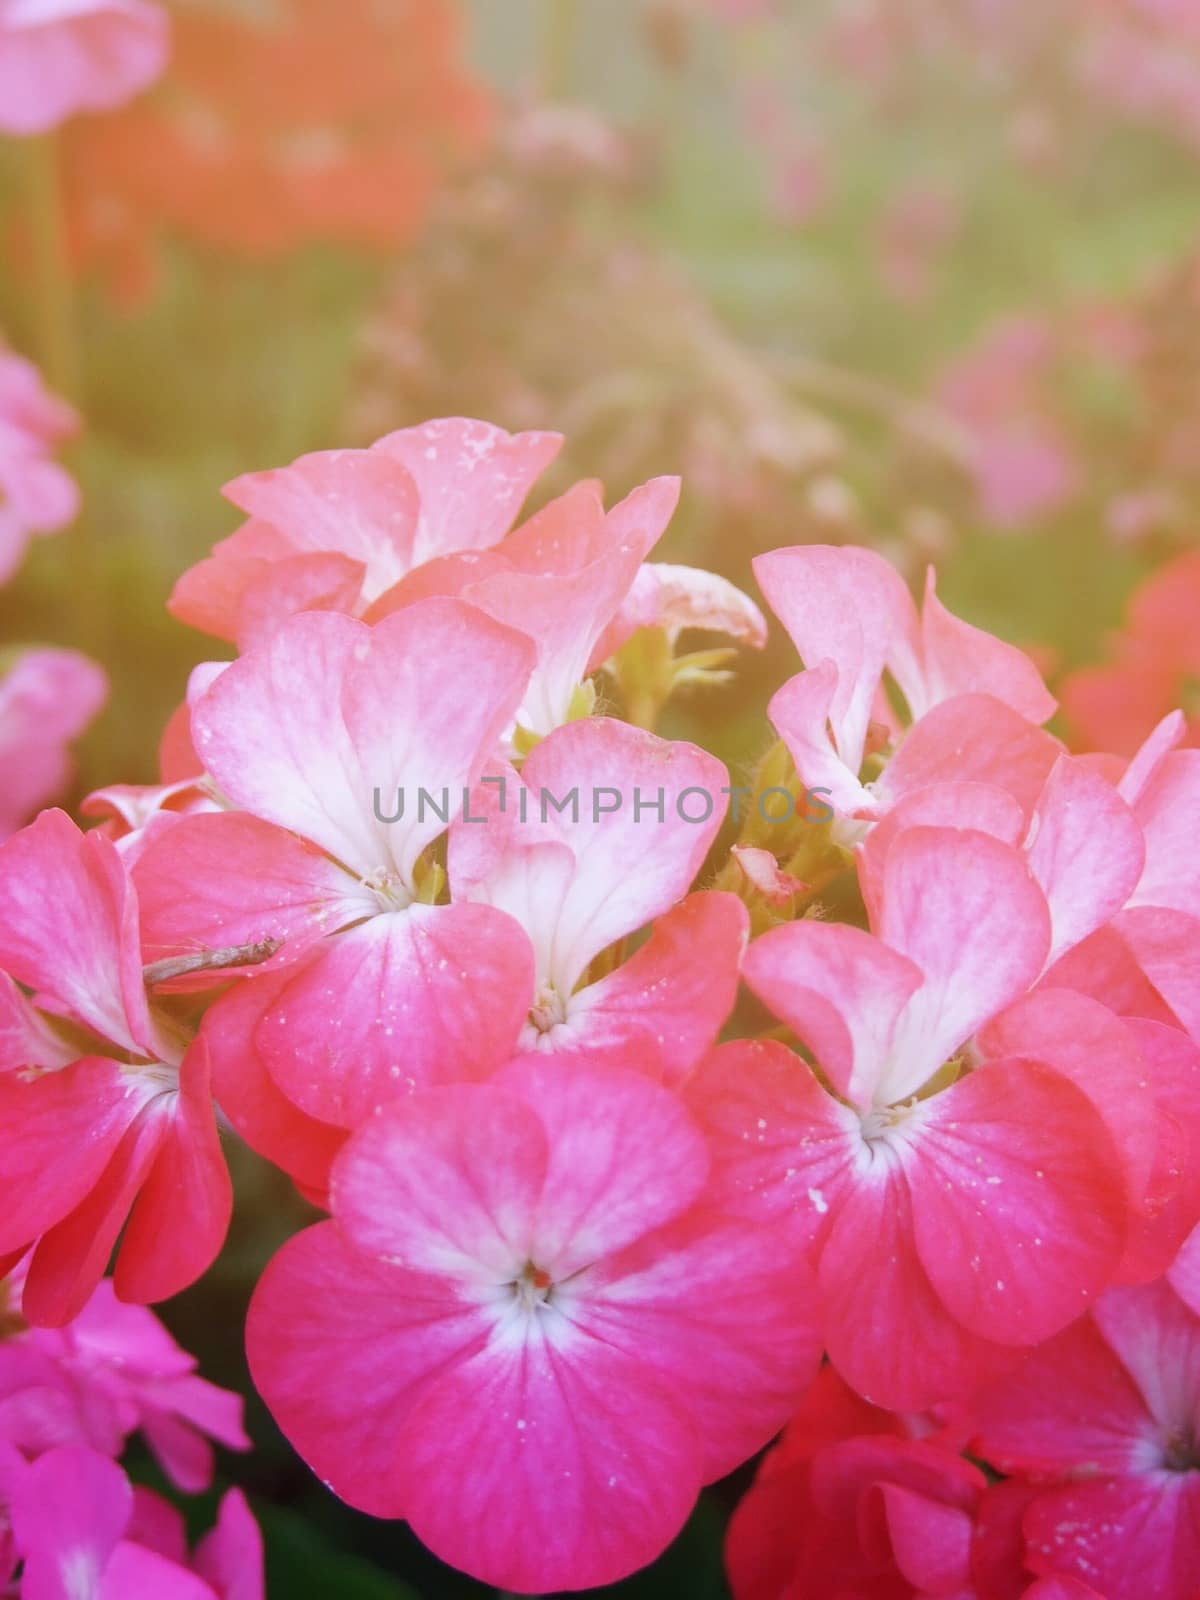 Nature background concept : Beautiful pink flowers in garden